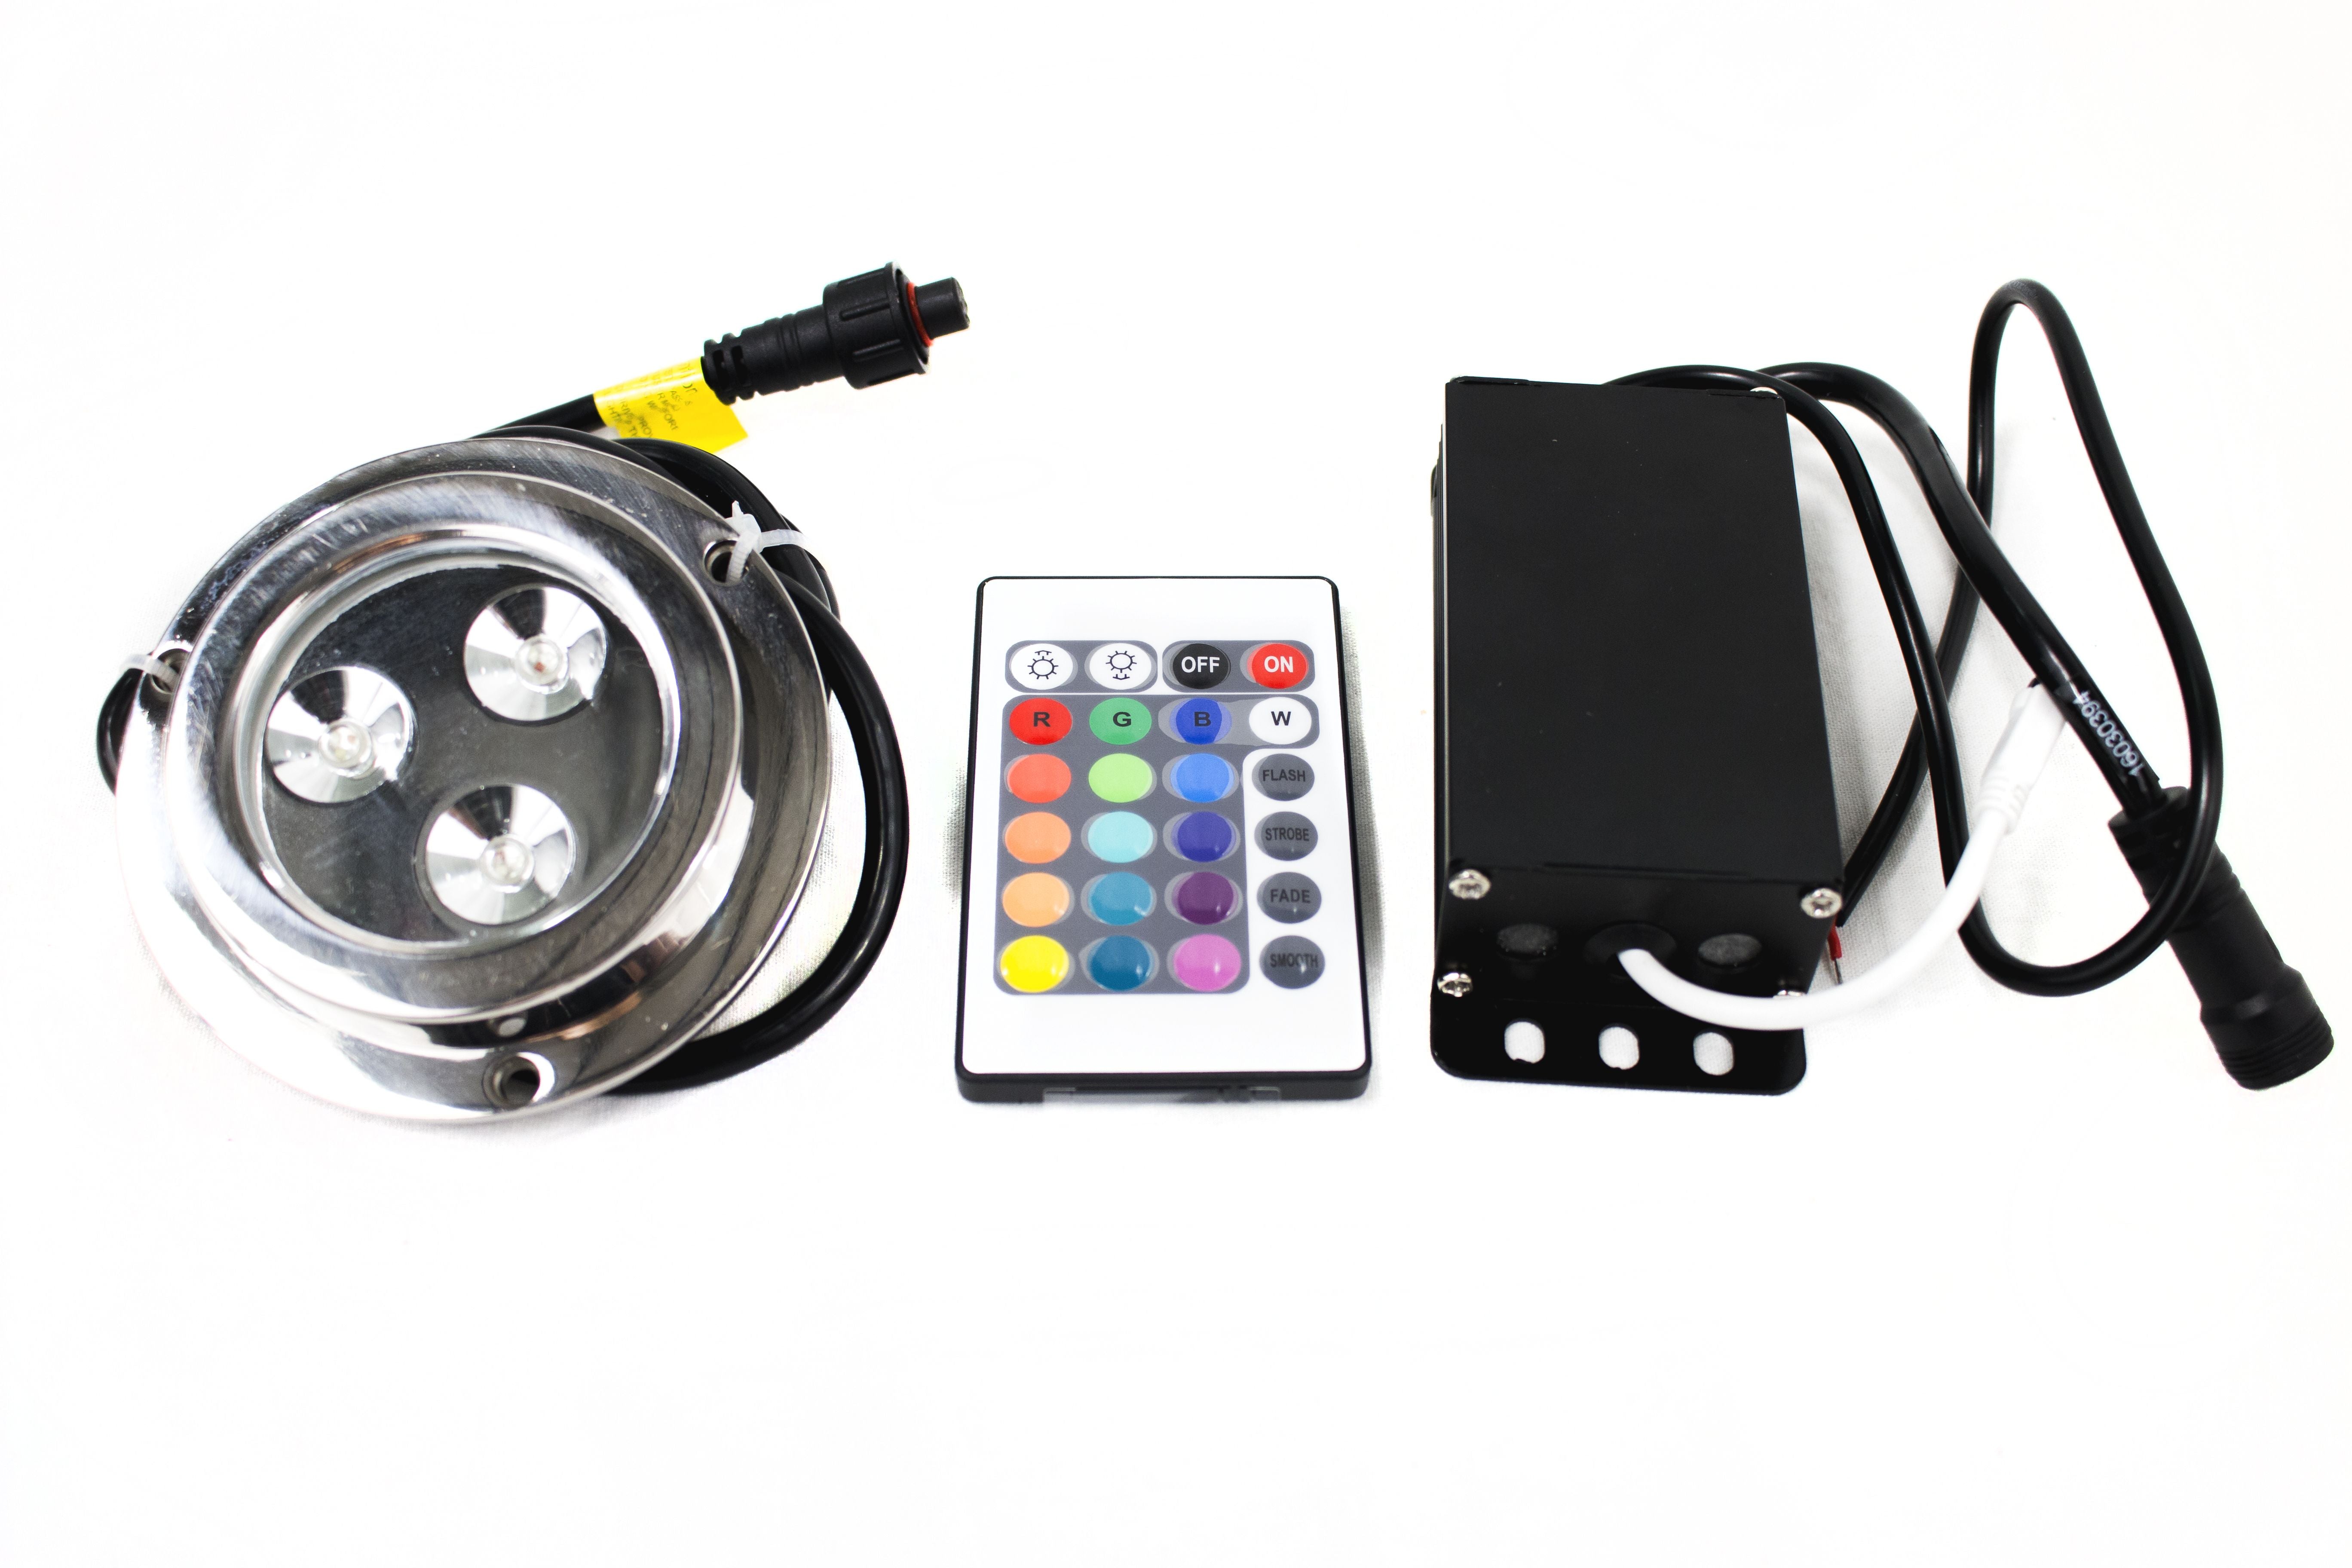 Race Sport 3 LED RGB Multi Color Underwater Light with Remote 316 Marine Grade Stainless Steel MS3LEDRGB